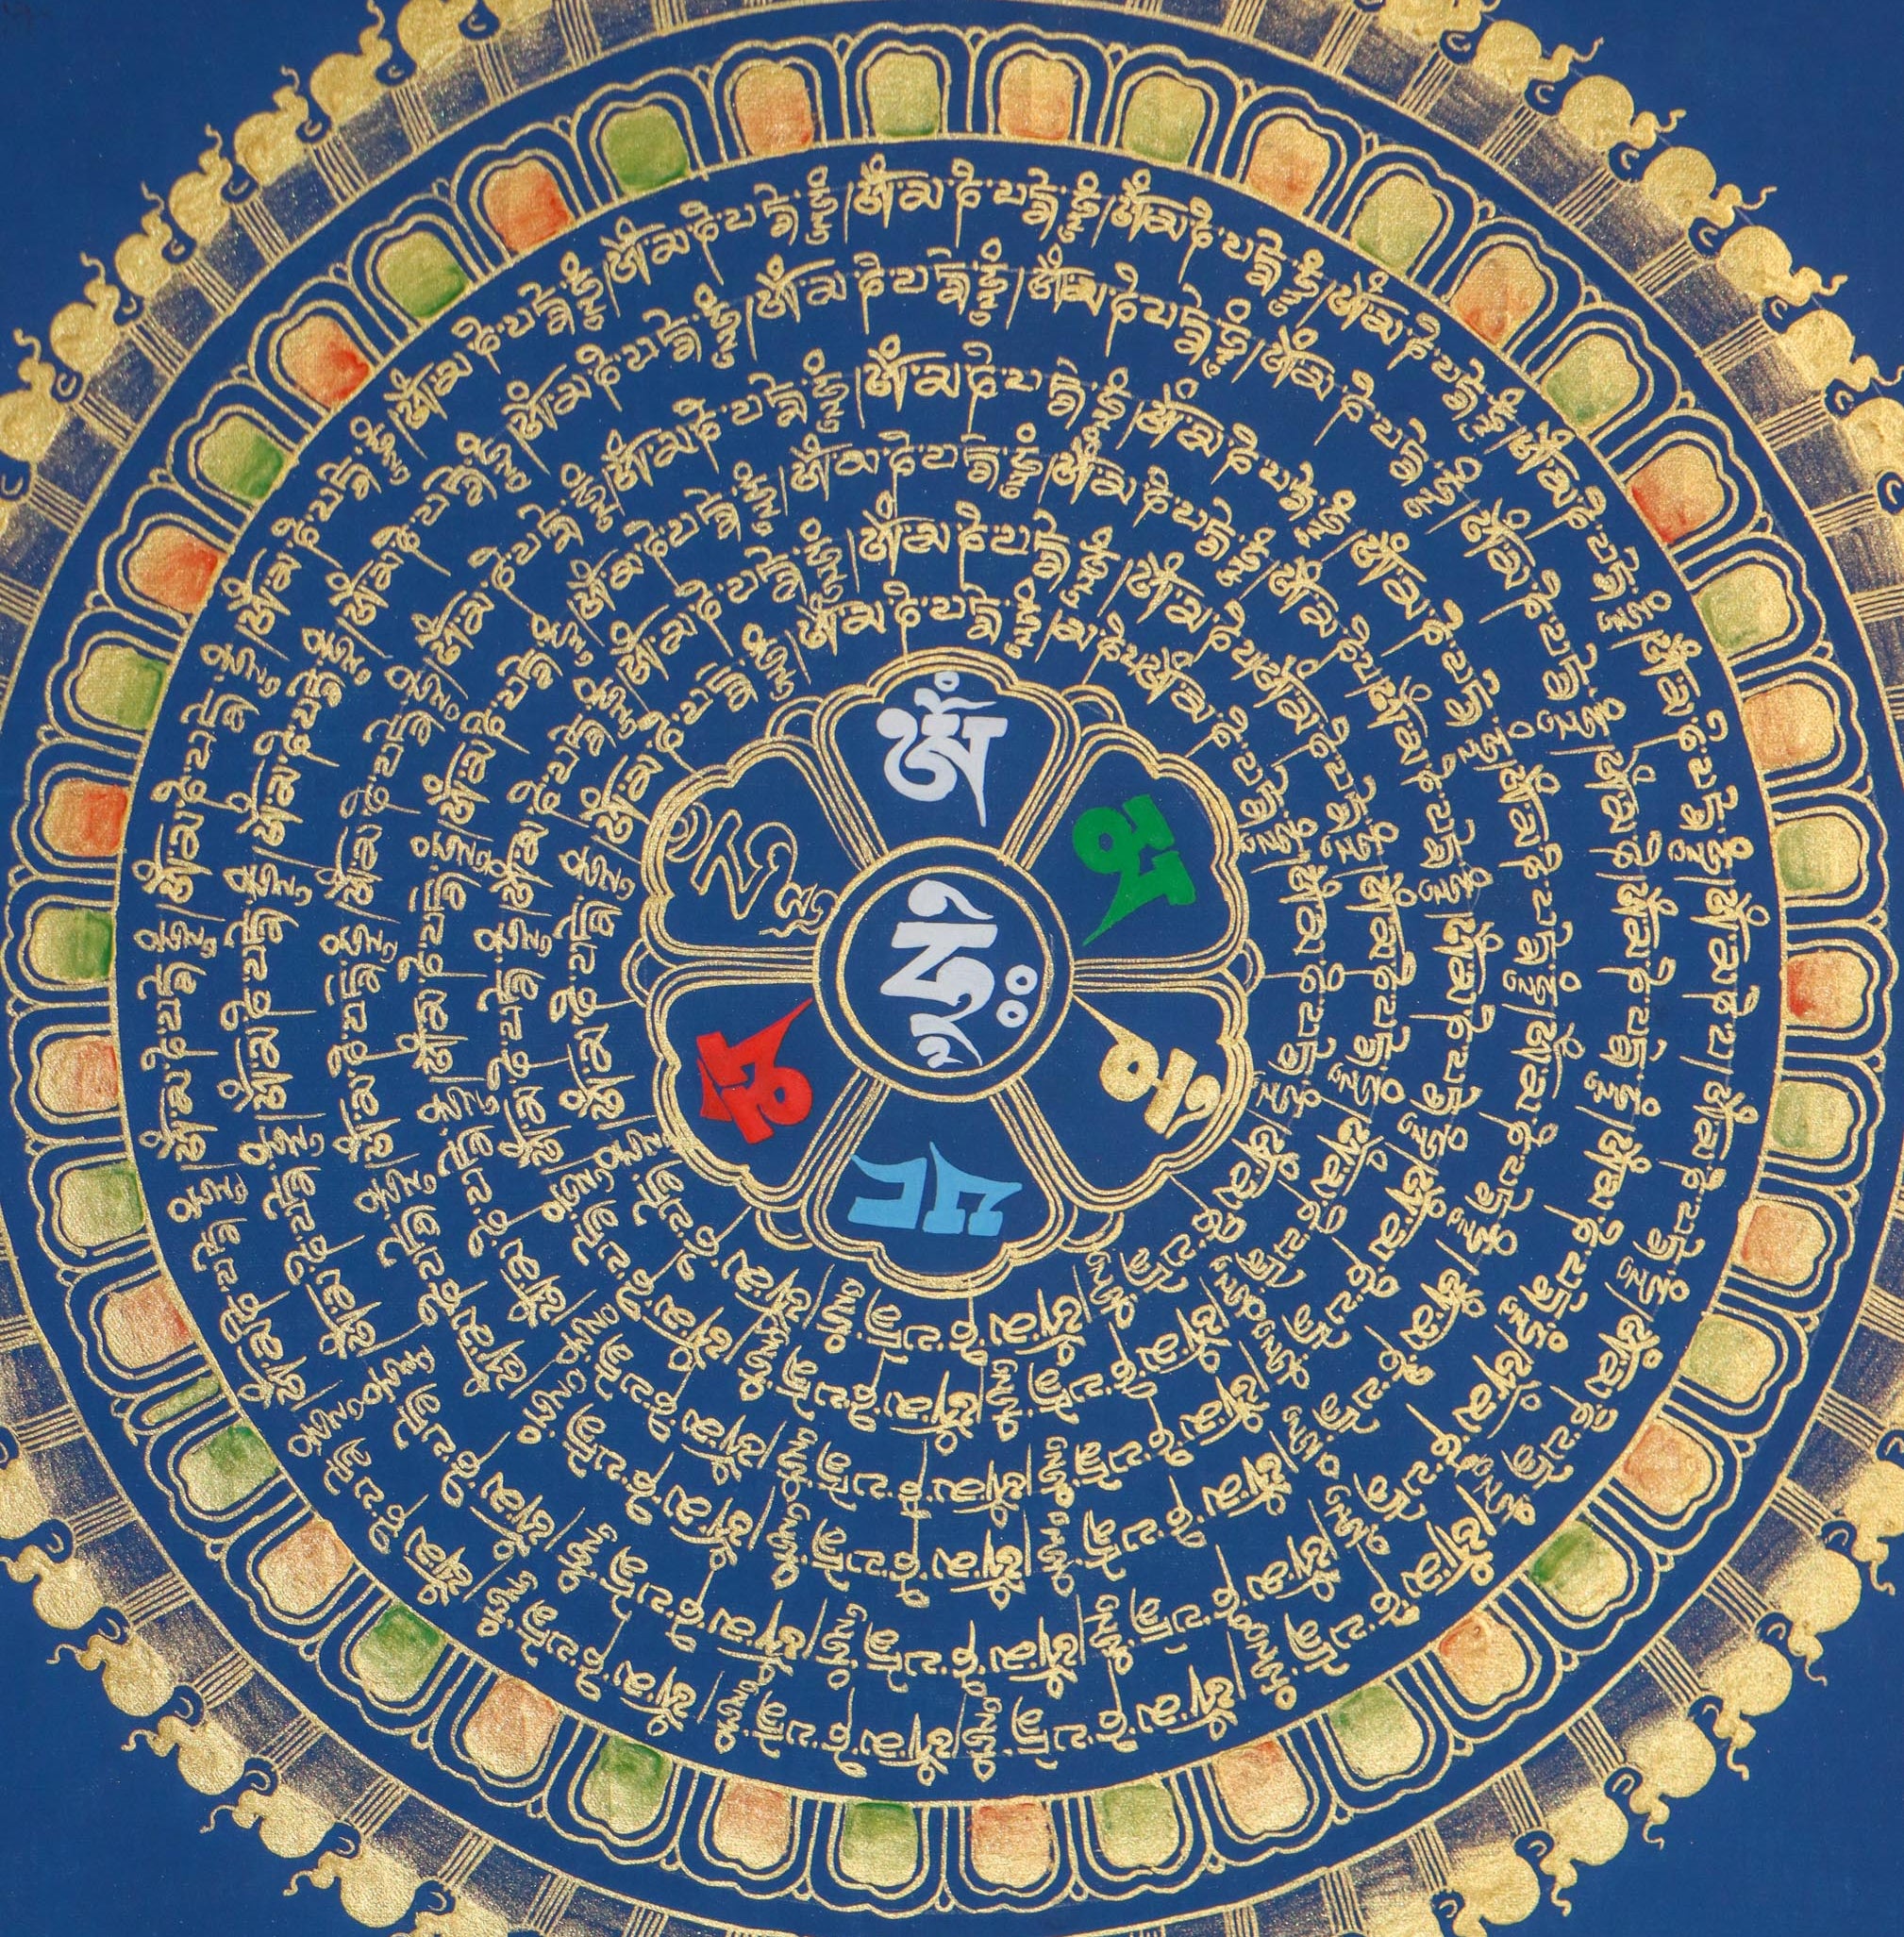 Mantra Mandala Thangka with Om Mani Padme hum scripted in the centre.